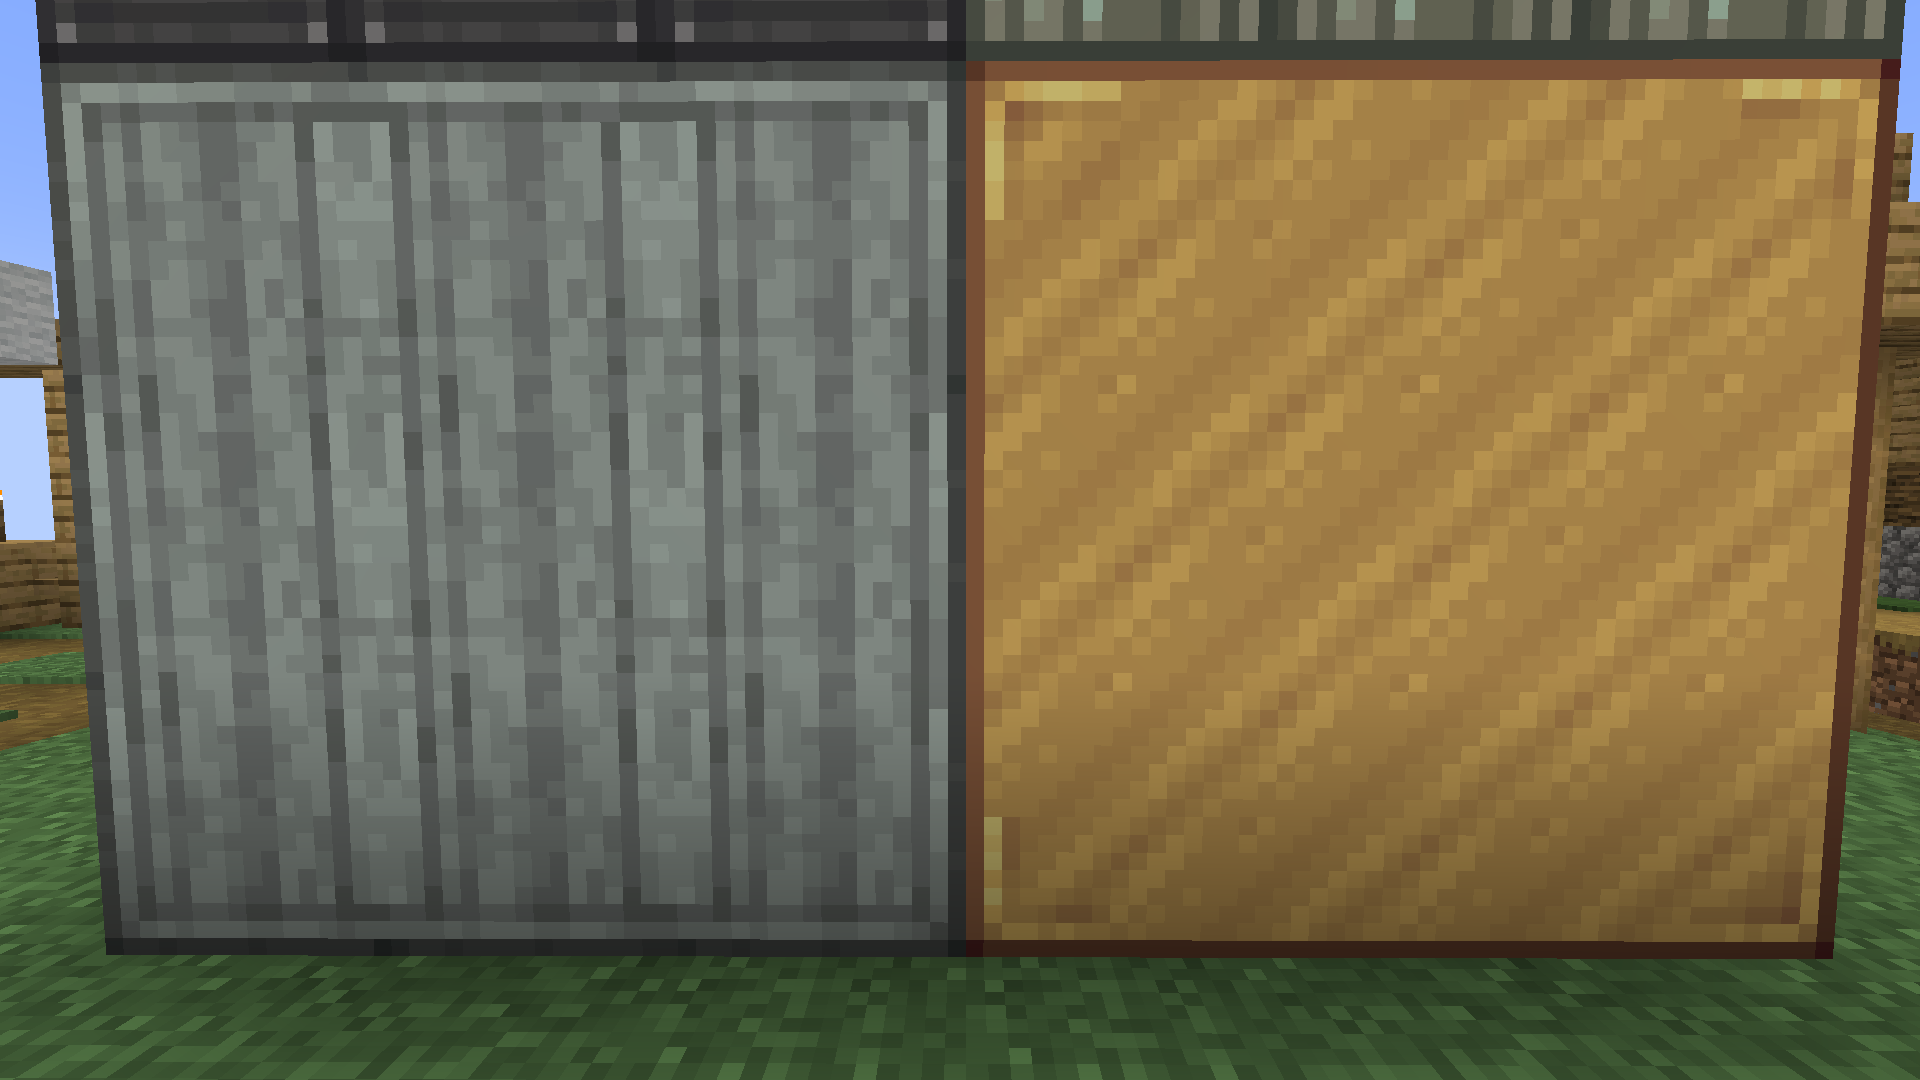 The current connected textures